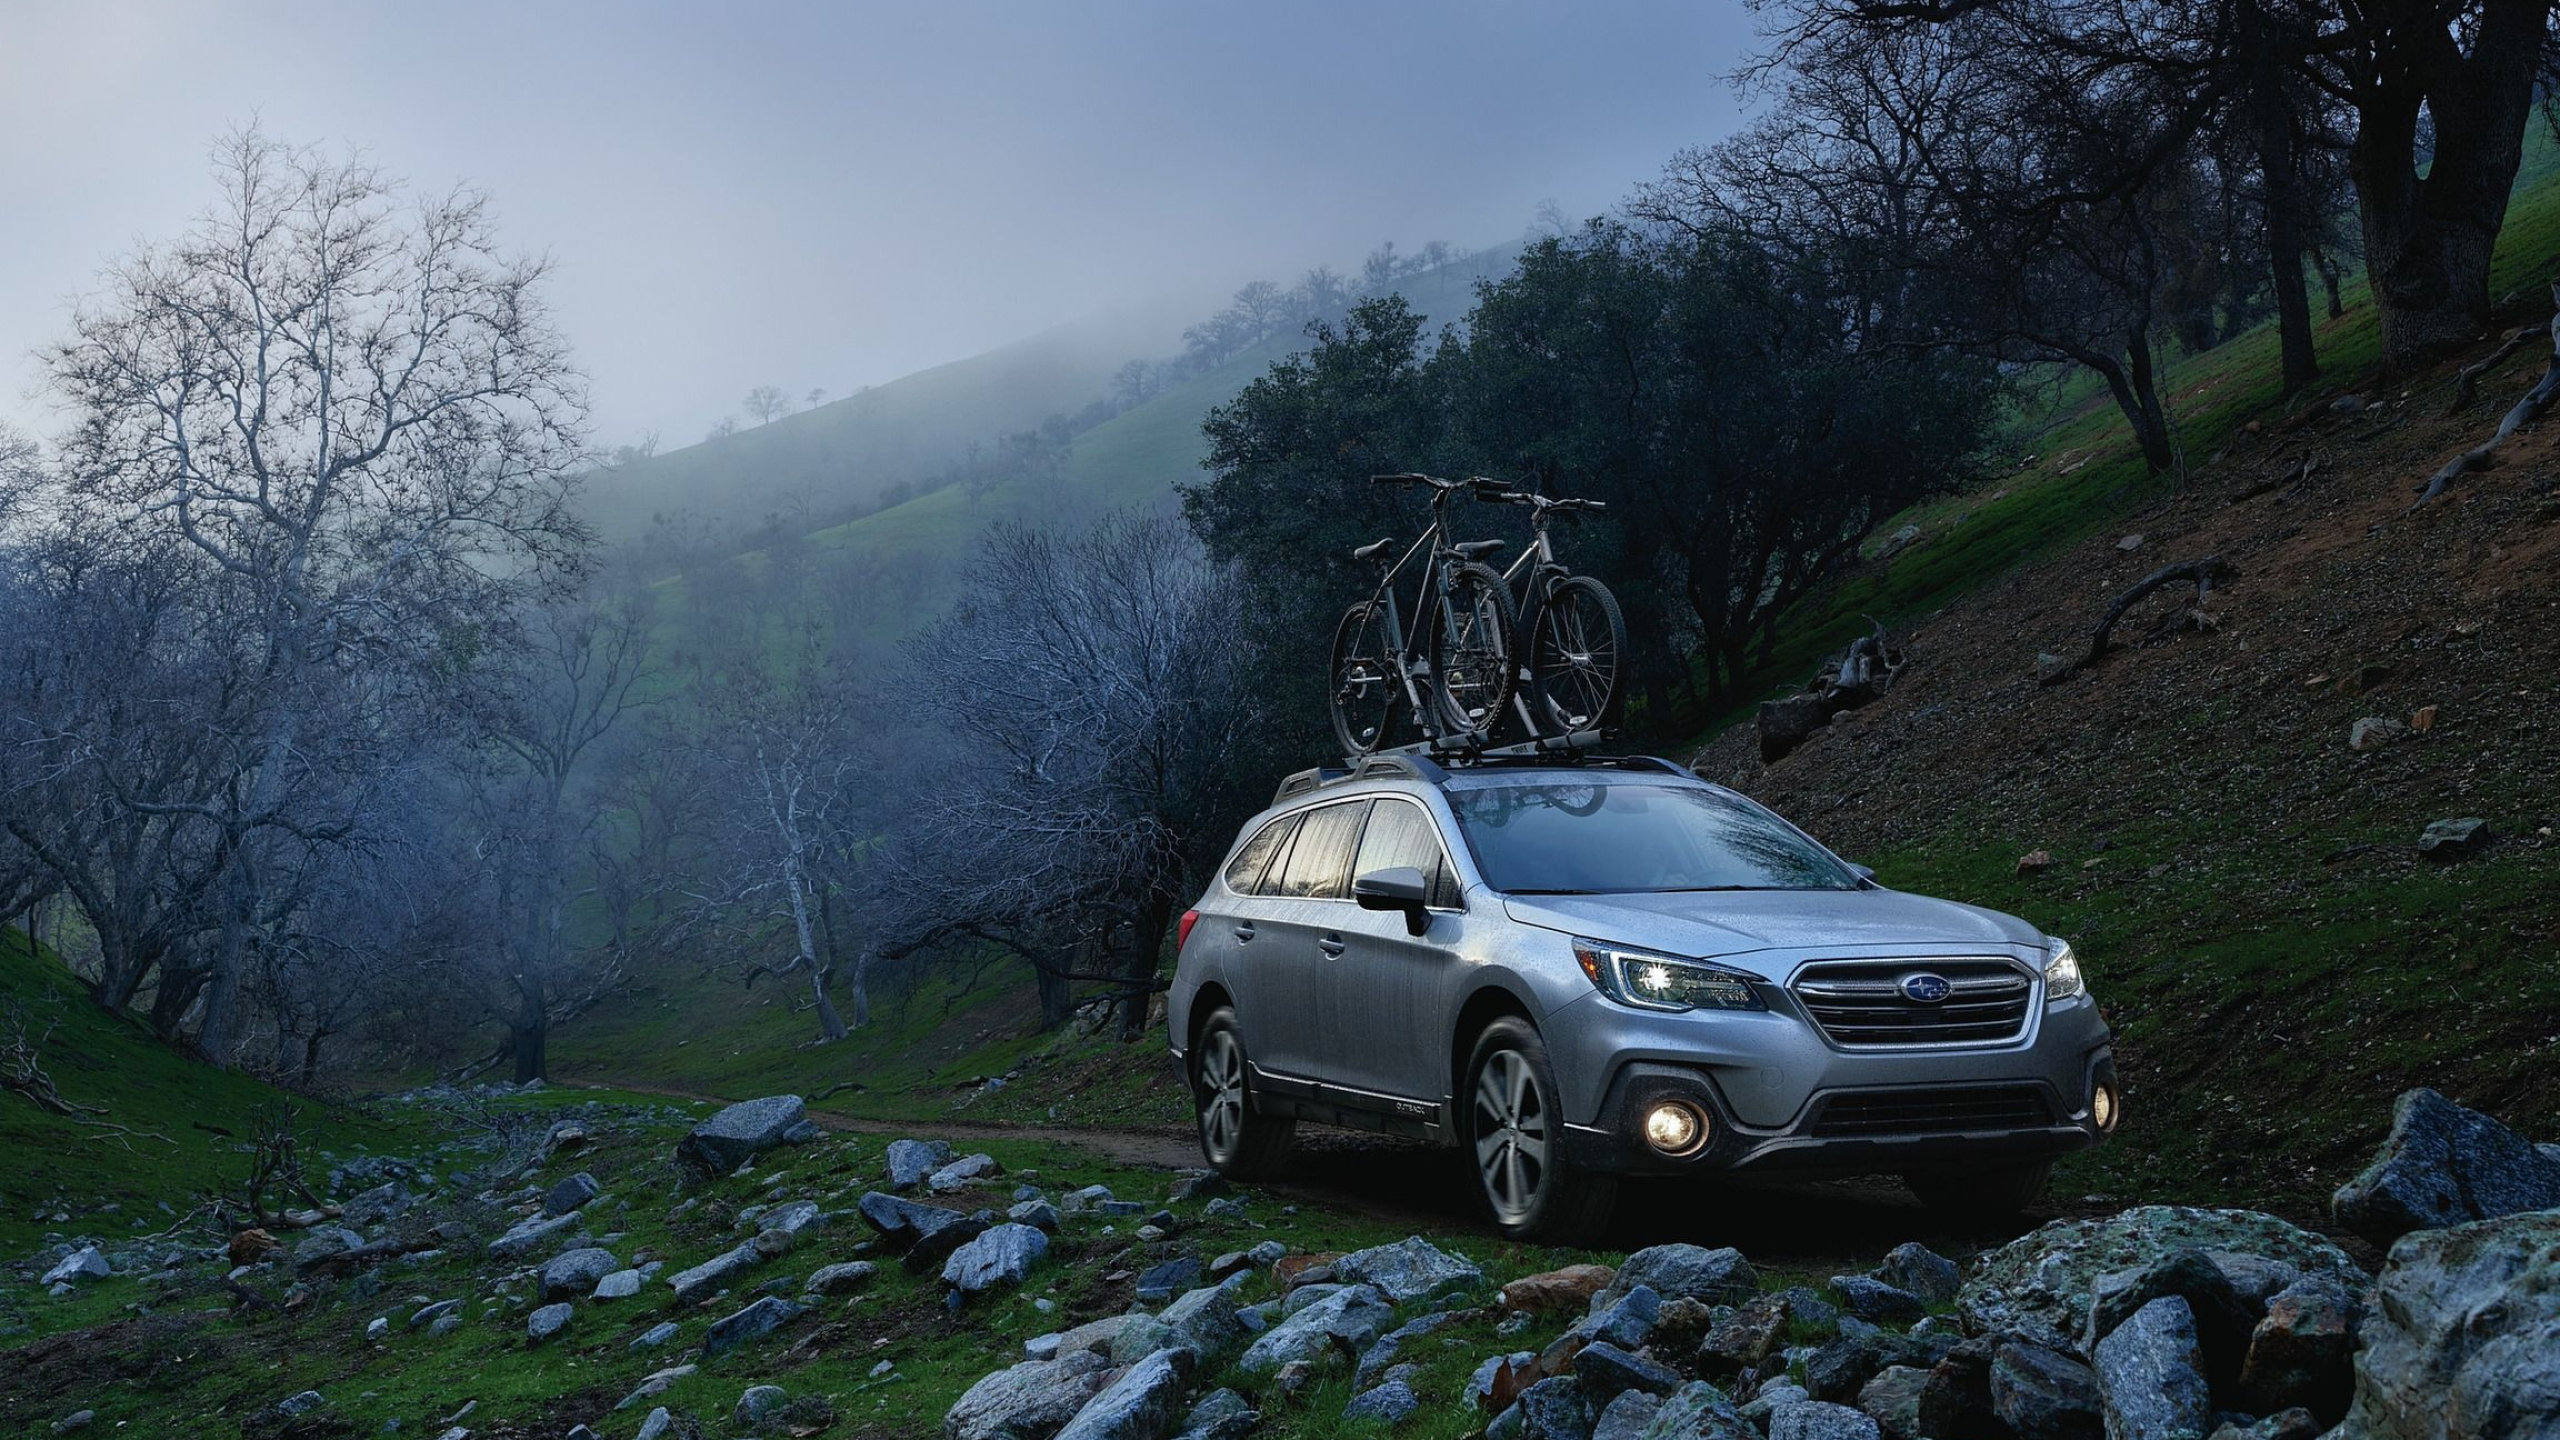 Subaru Outback, High-quality wallpapers, Automotive backgrounds, Top-rated, 2560x1440 HD Desktop